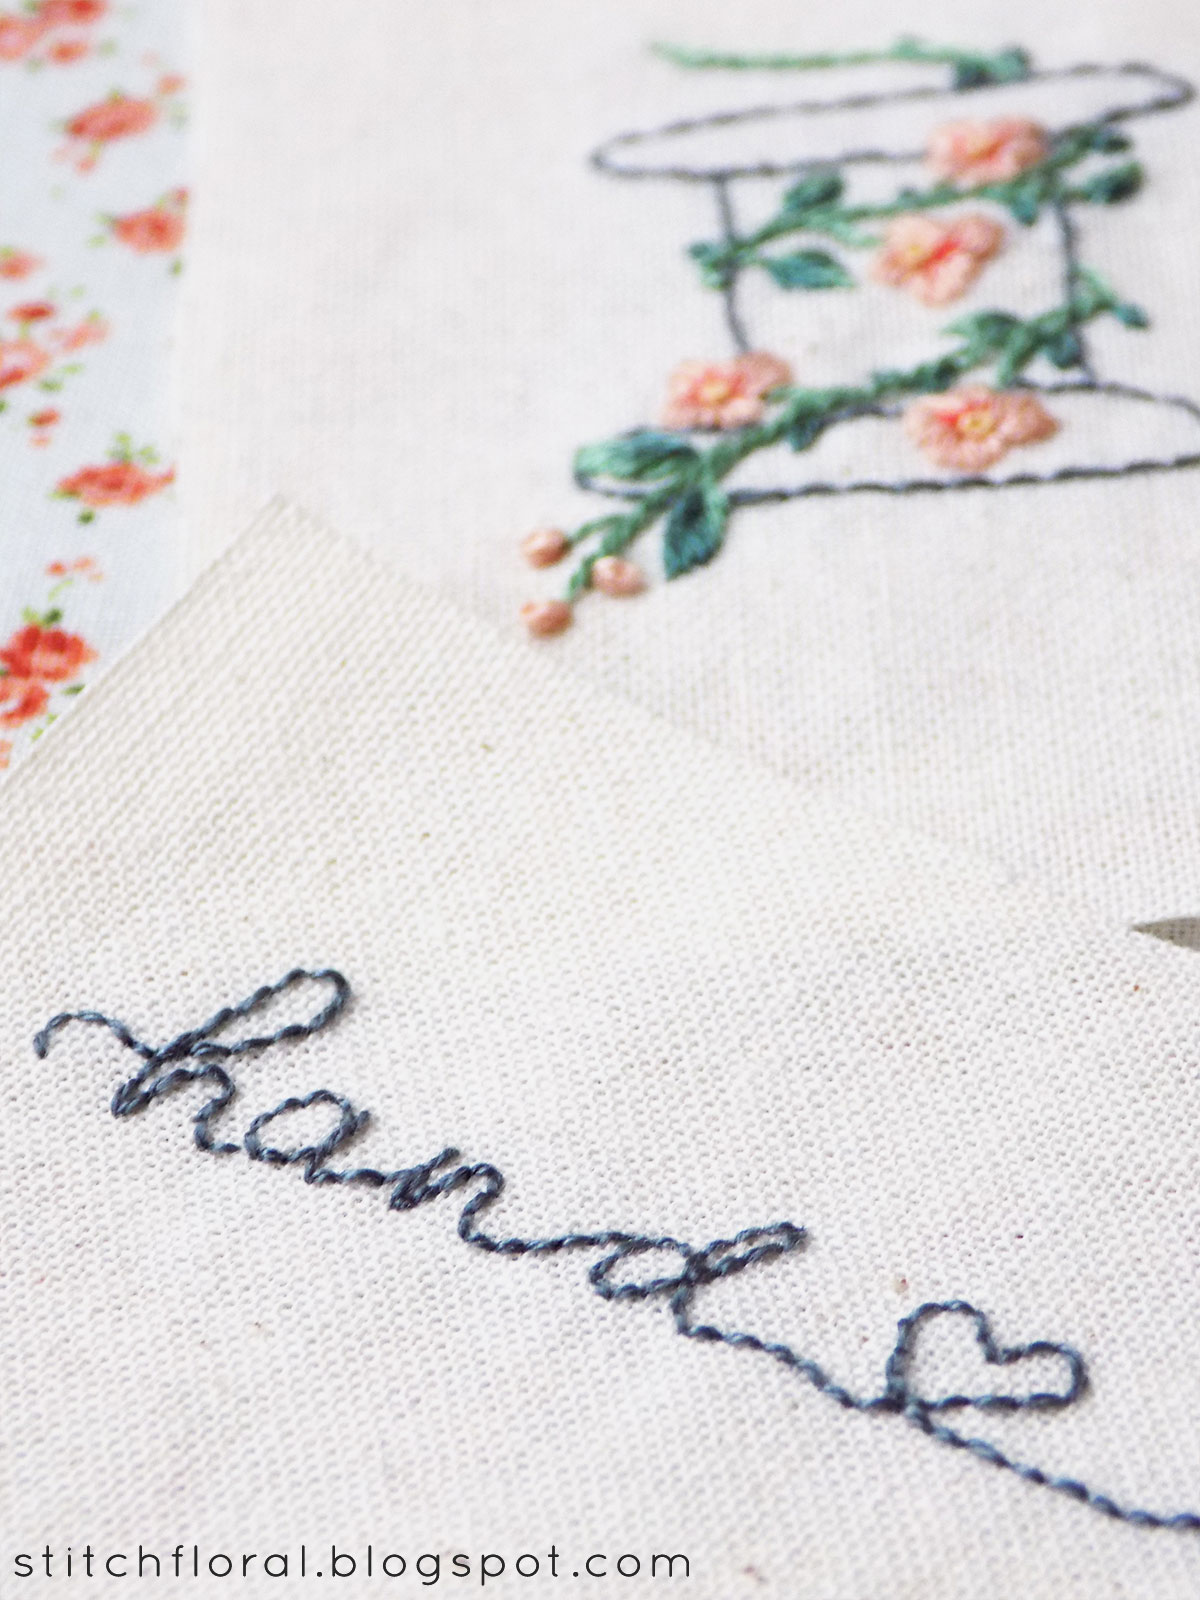 Best embroidery stitches. Top 10 stitches to learn